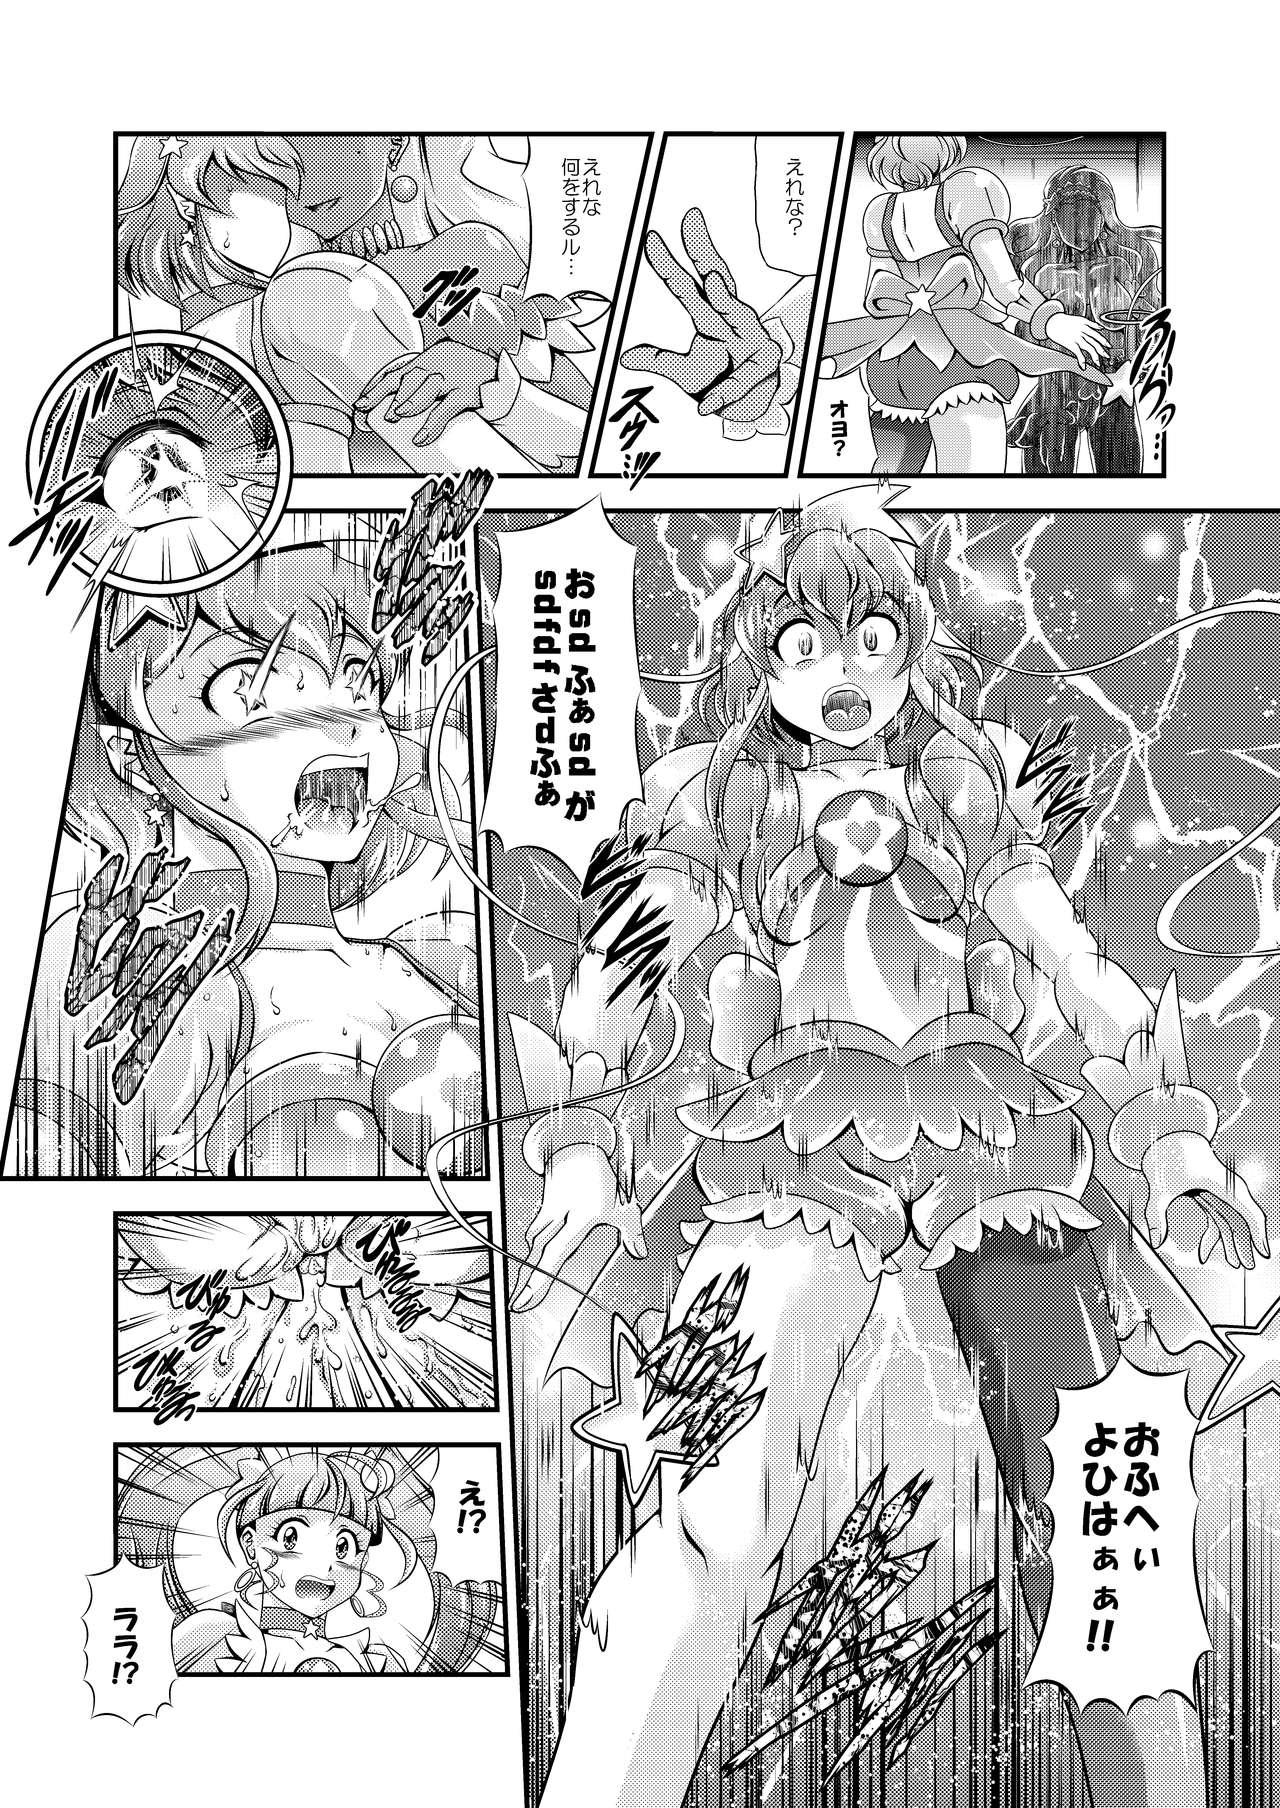 Gostosas Greatest Eclipse ~ OVER the RAINBOW + Omake File - Star twinkle precure Dutch - Page 11